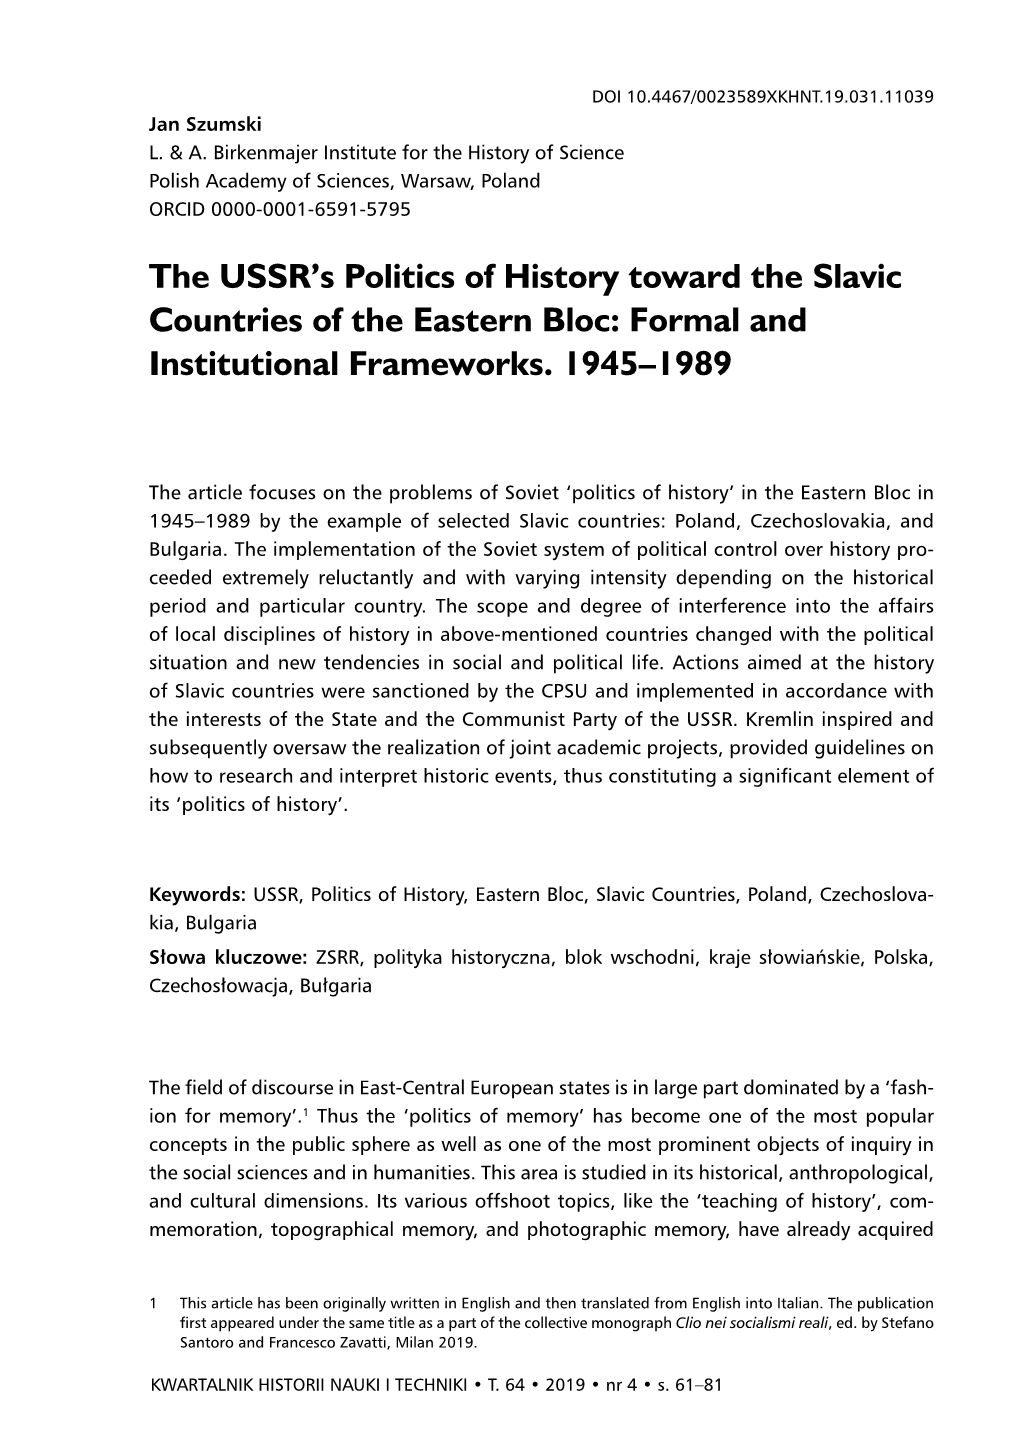 The USSR's Politics of History Toward the Slavic Countries of the Eastern